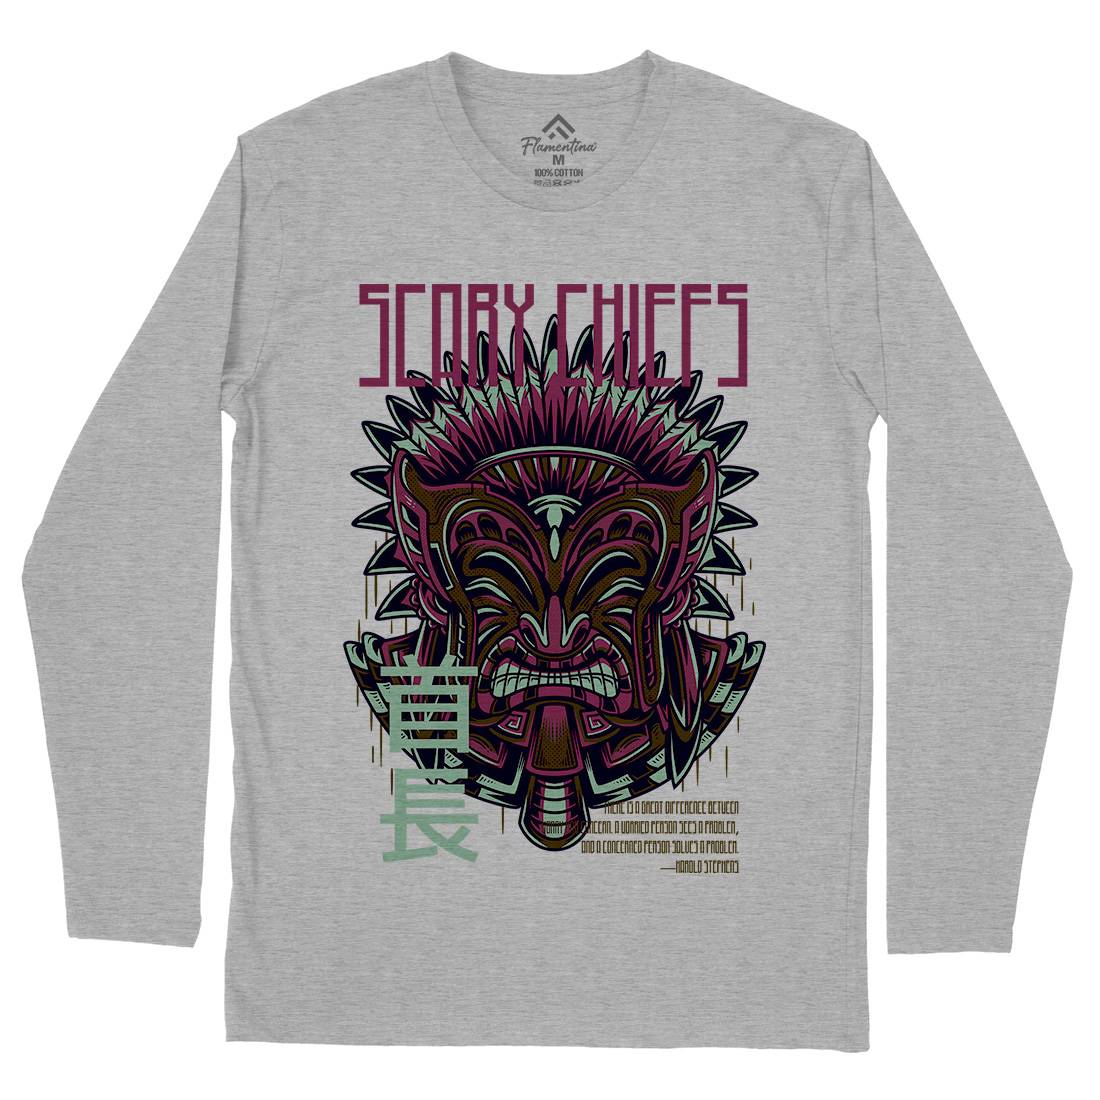 Scary Chiefs Mens Long Sleeve T-Shirt American D809